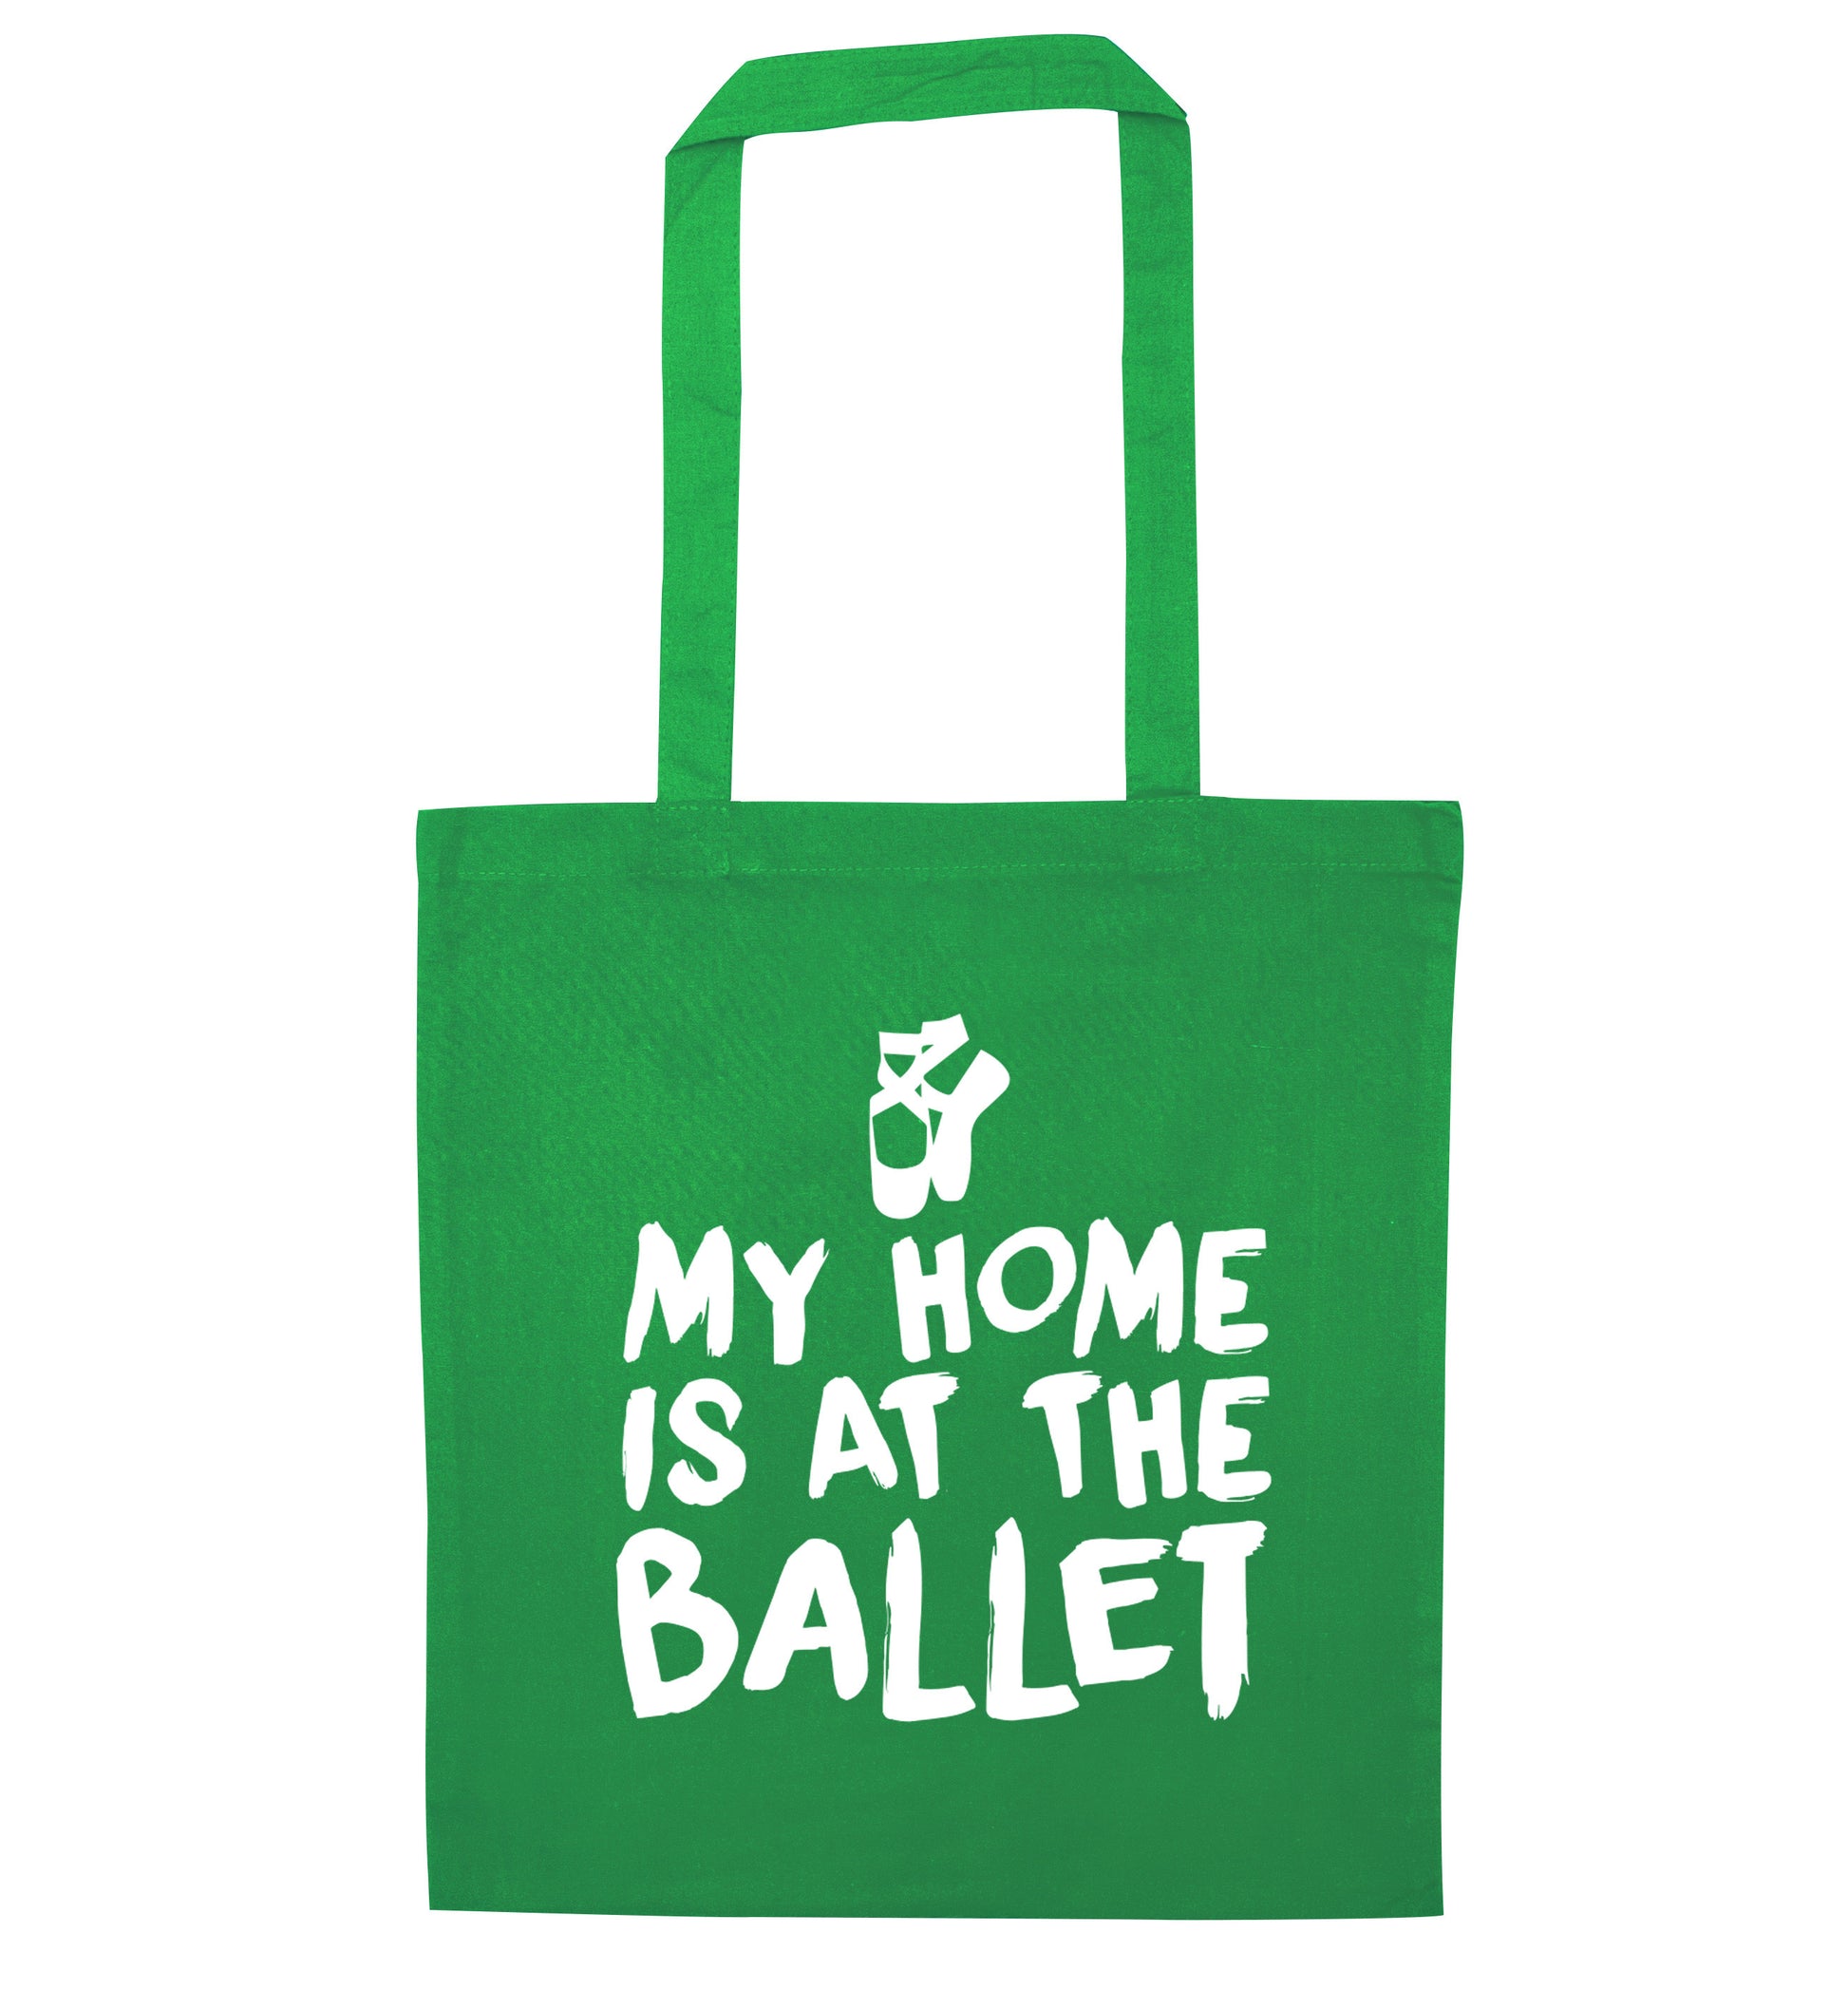 My home is at the ballet green tote bag